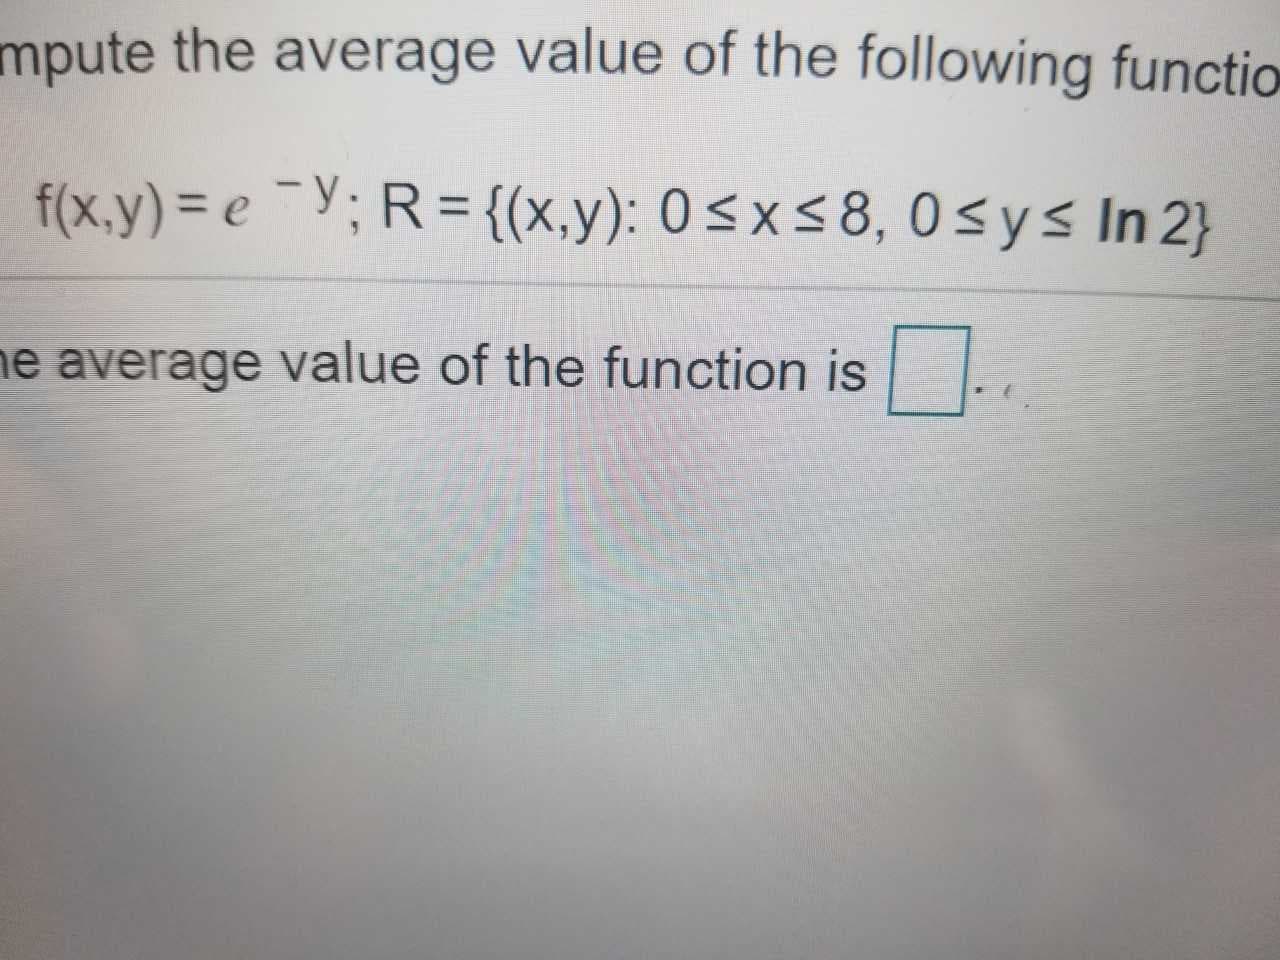 mpute the average value of the following functio
e average value of the function is
